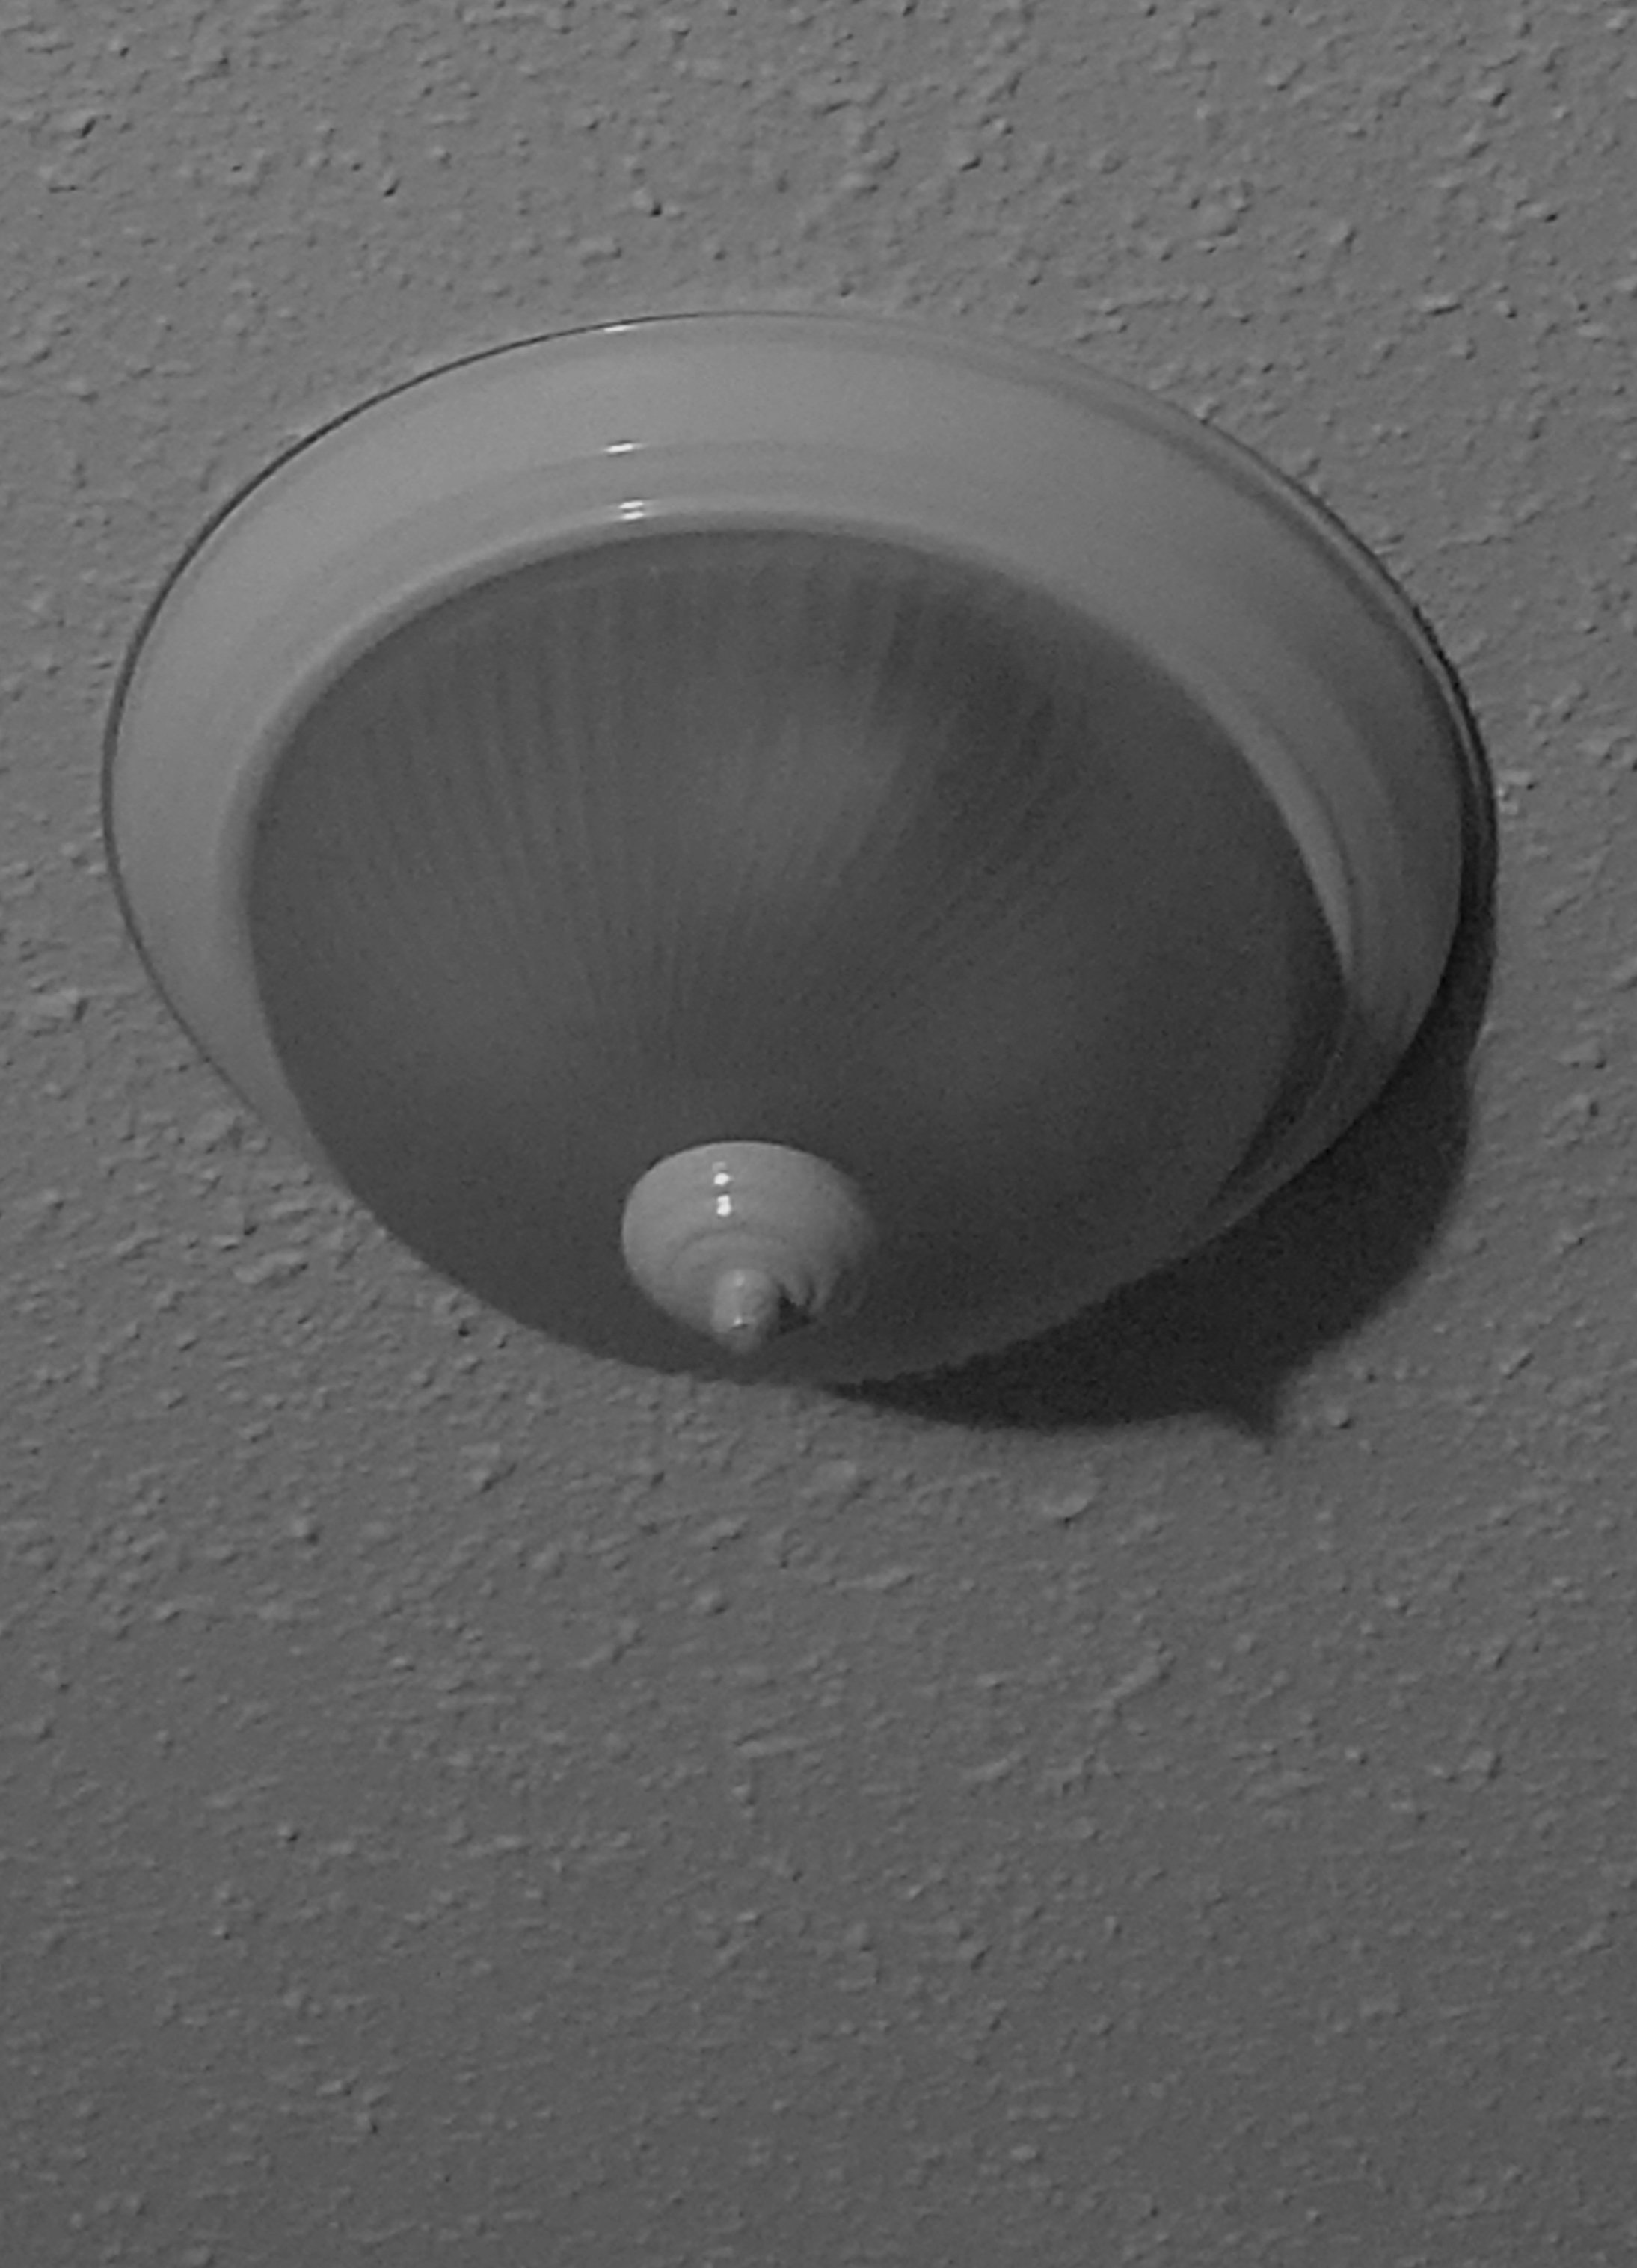 image of a dome light cover with a protruding "nipple" at it's highest point-- making it breast-like in appearance.